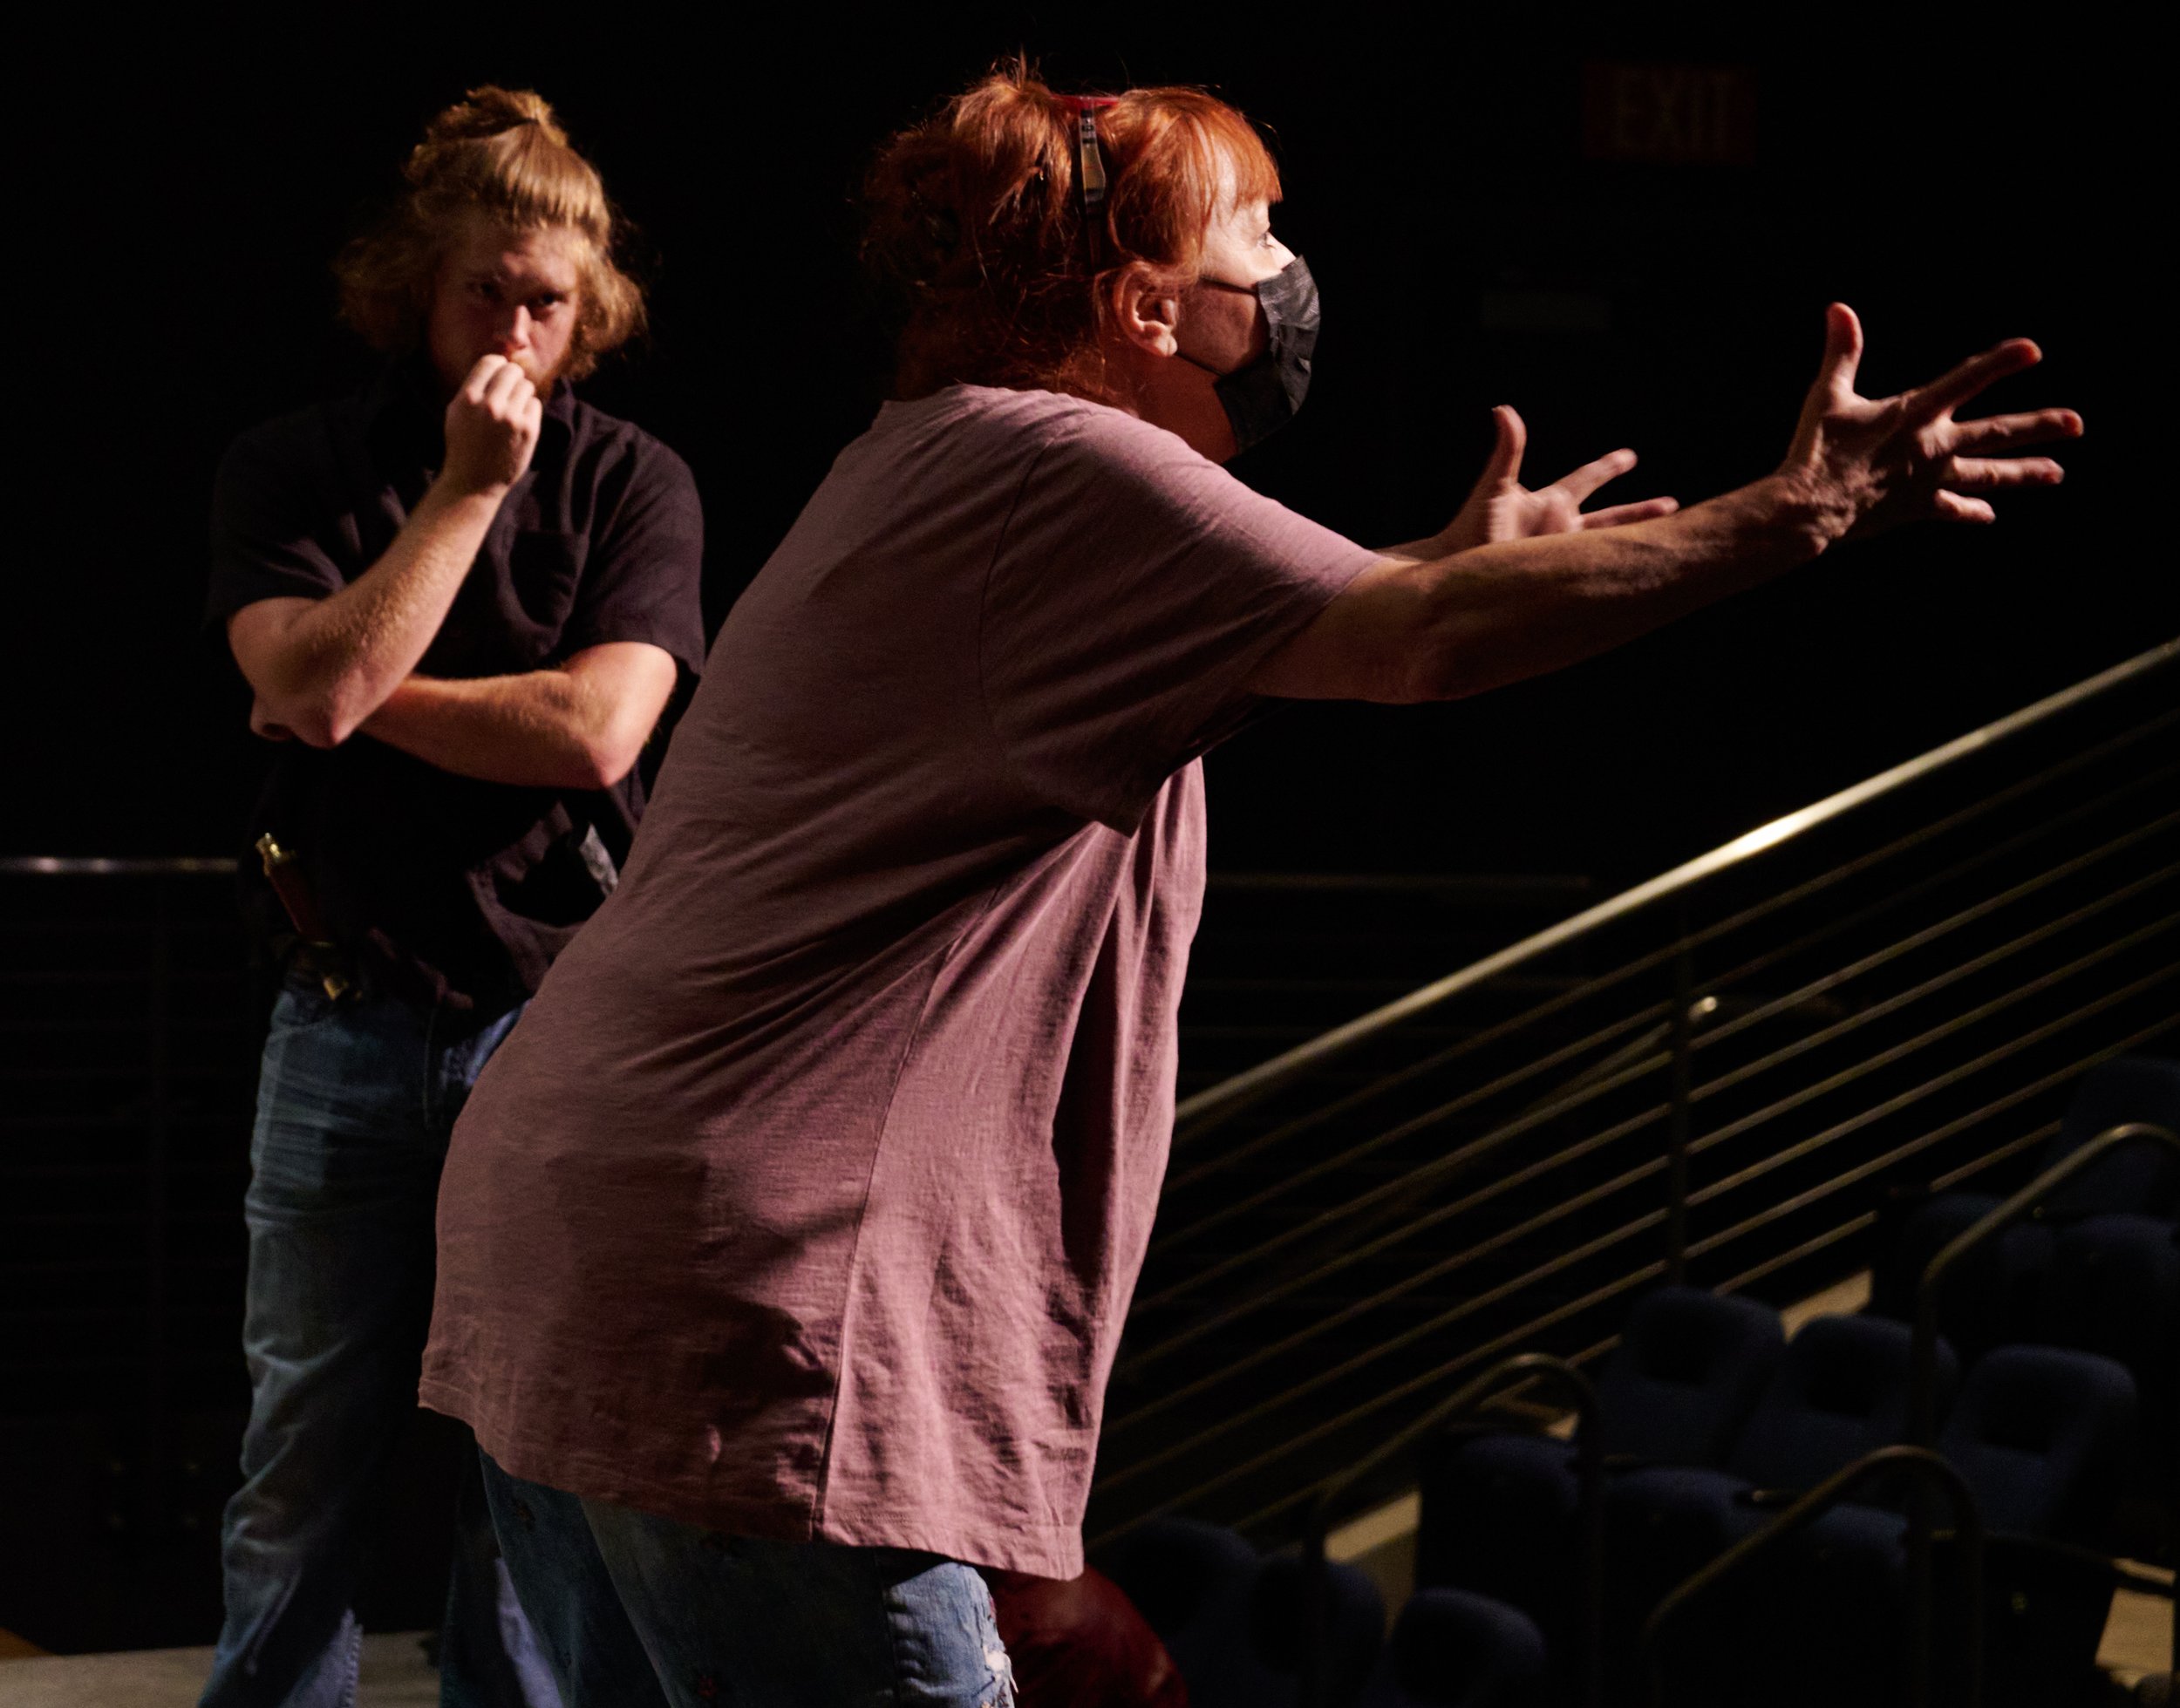  Justine Valine and Director Terrin Adair during rehearsal of the Santa Monica College Theatre Arts production of "Treasure Island" at the SMC Main Stage on Wednesday, April 27, 2022, in Santa Monica, Calif. (Nicholas McCall | The Corsair) 